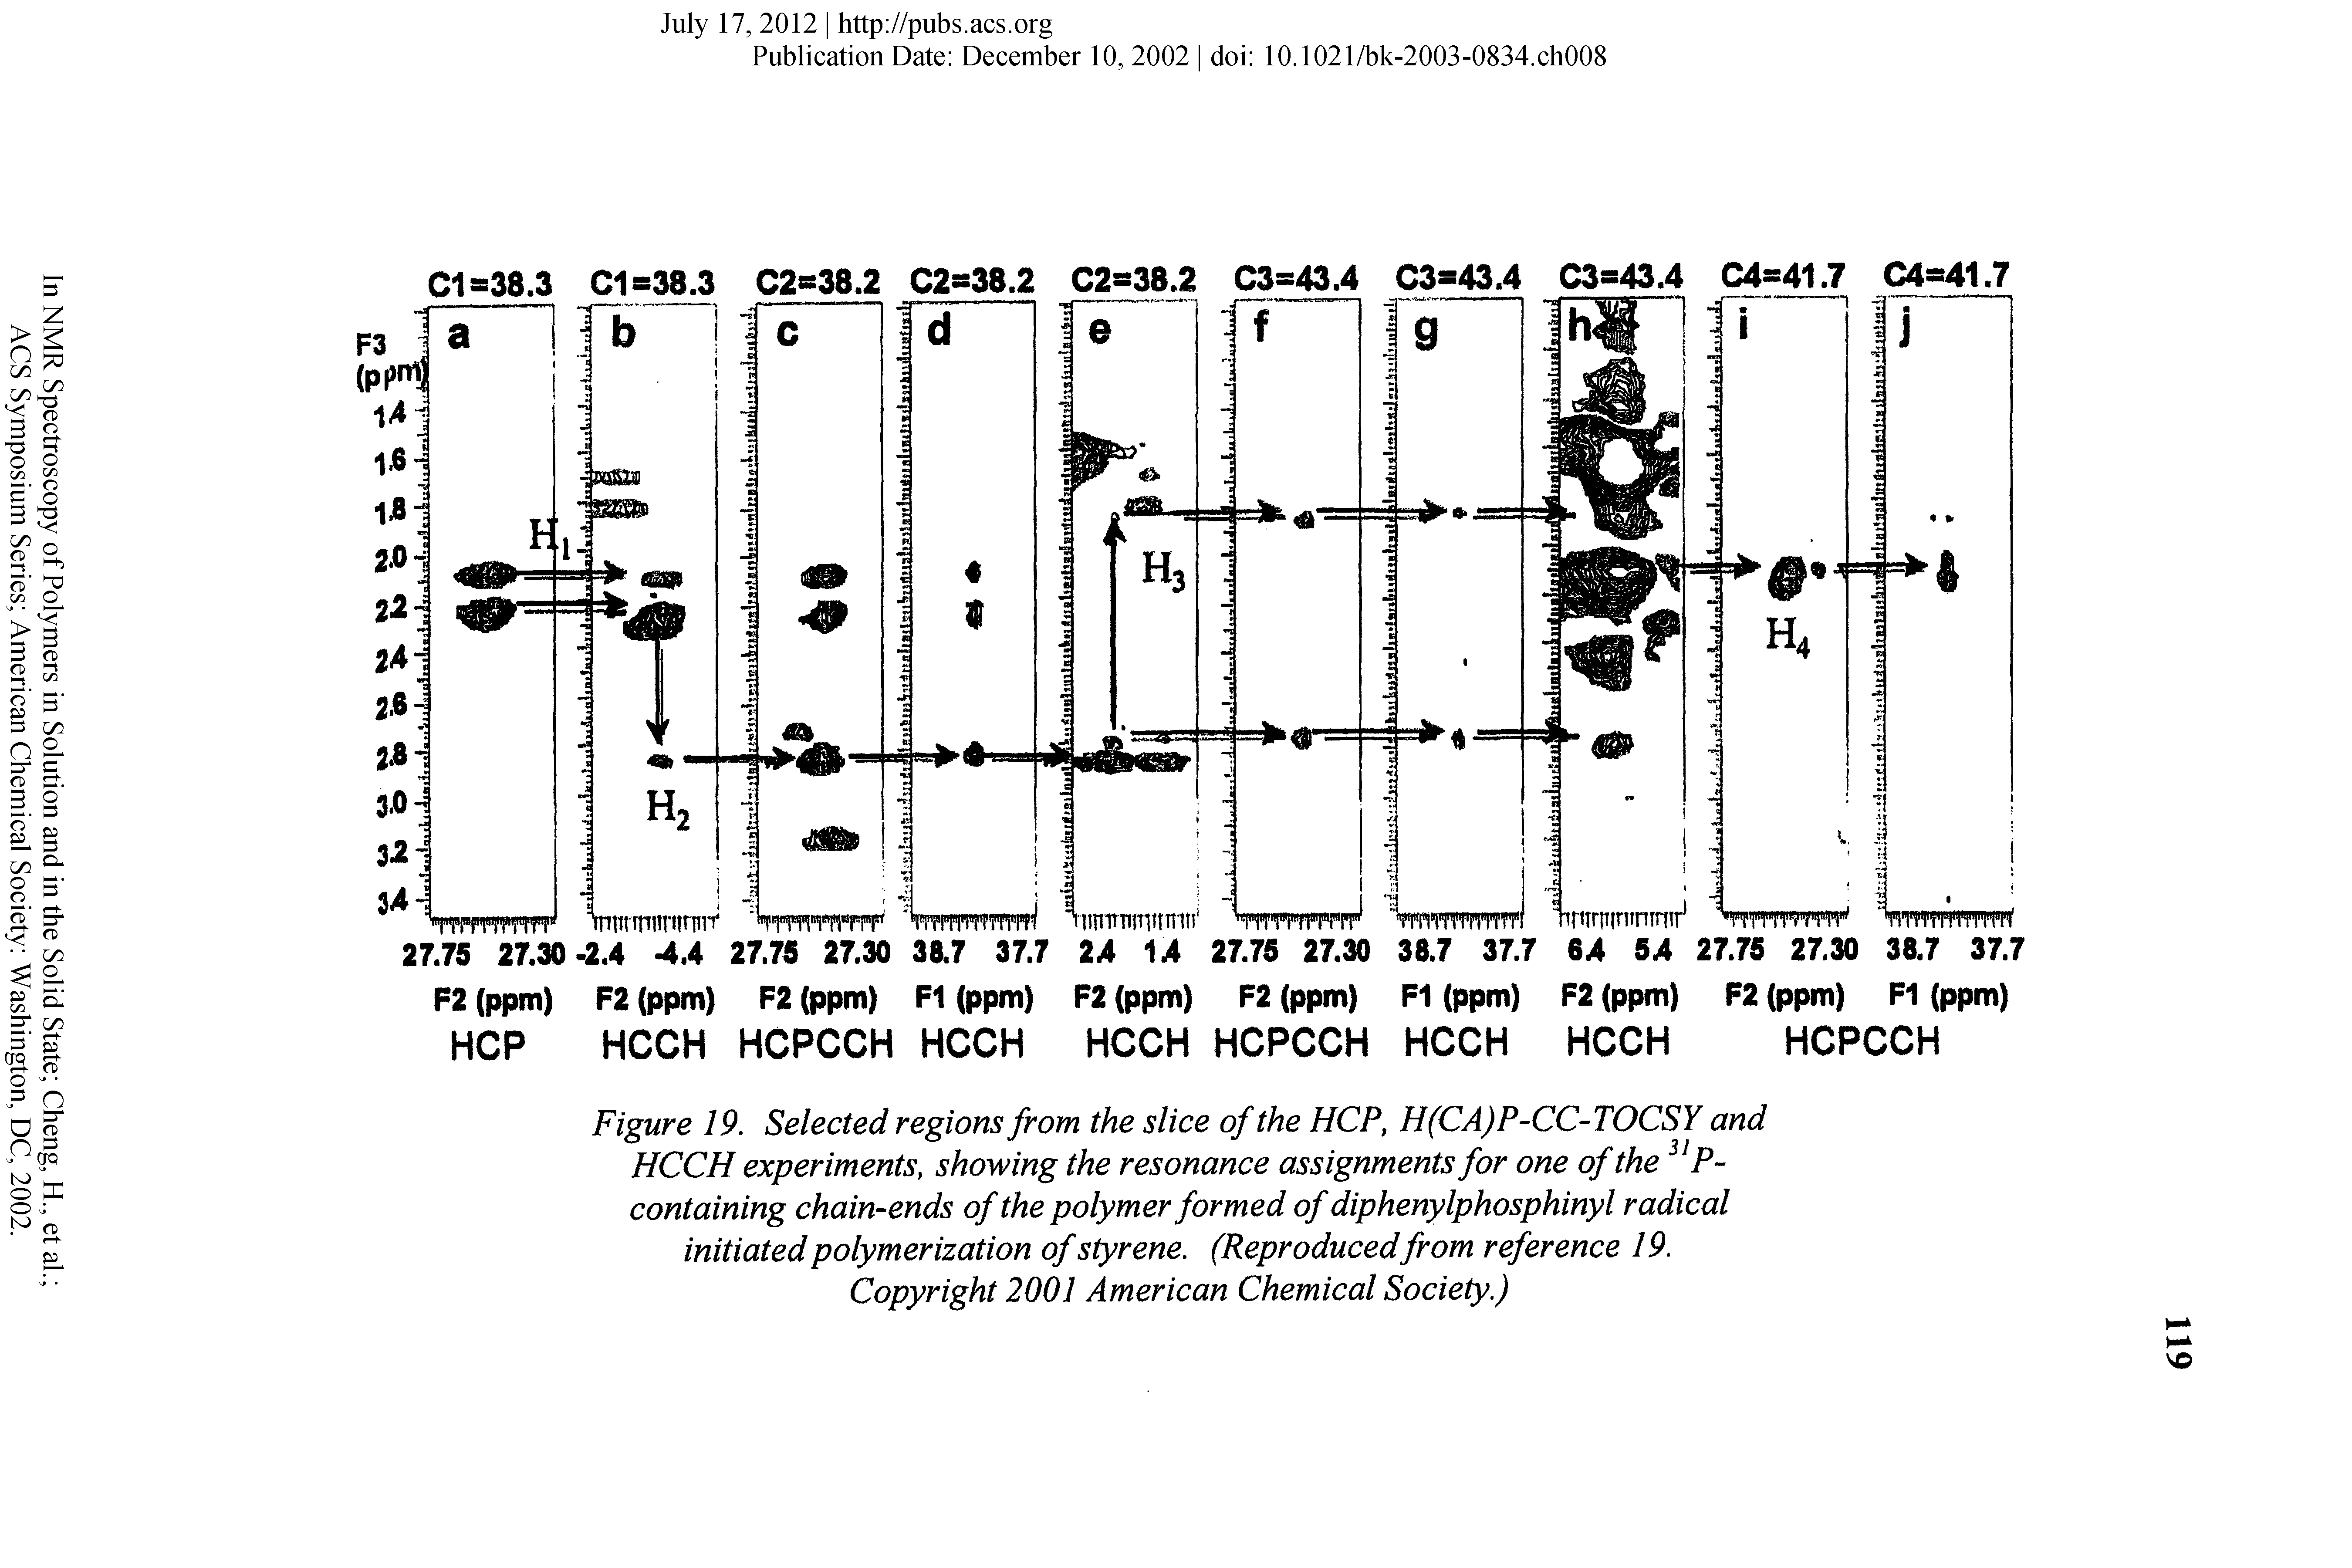 Figure 19. Selected regions from the slice of the HCP, H(CA)P-CC-TOCSY and HCCH experiments, showing the resonance assignments for one of the P-containing chain-ends of the polymer formed of diphenylphosphinyl radical initiated polymerization of styrene. (Reproducedfrom reference 19. Copyright 2001 American Chemical Society.)...